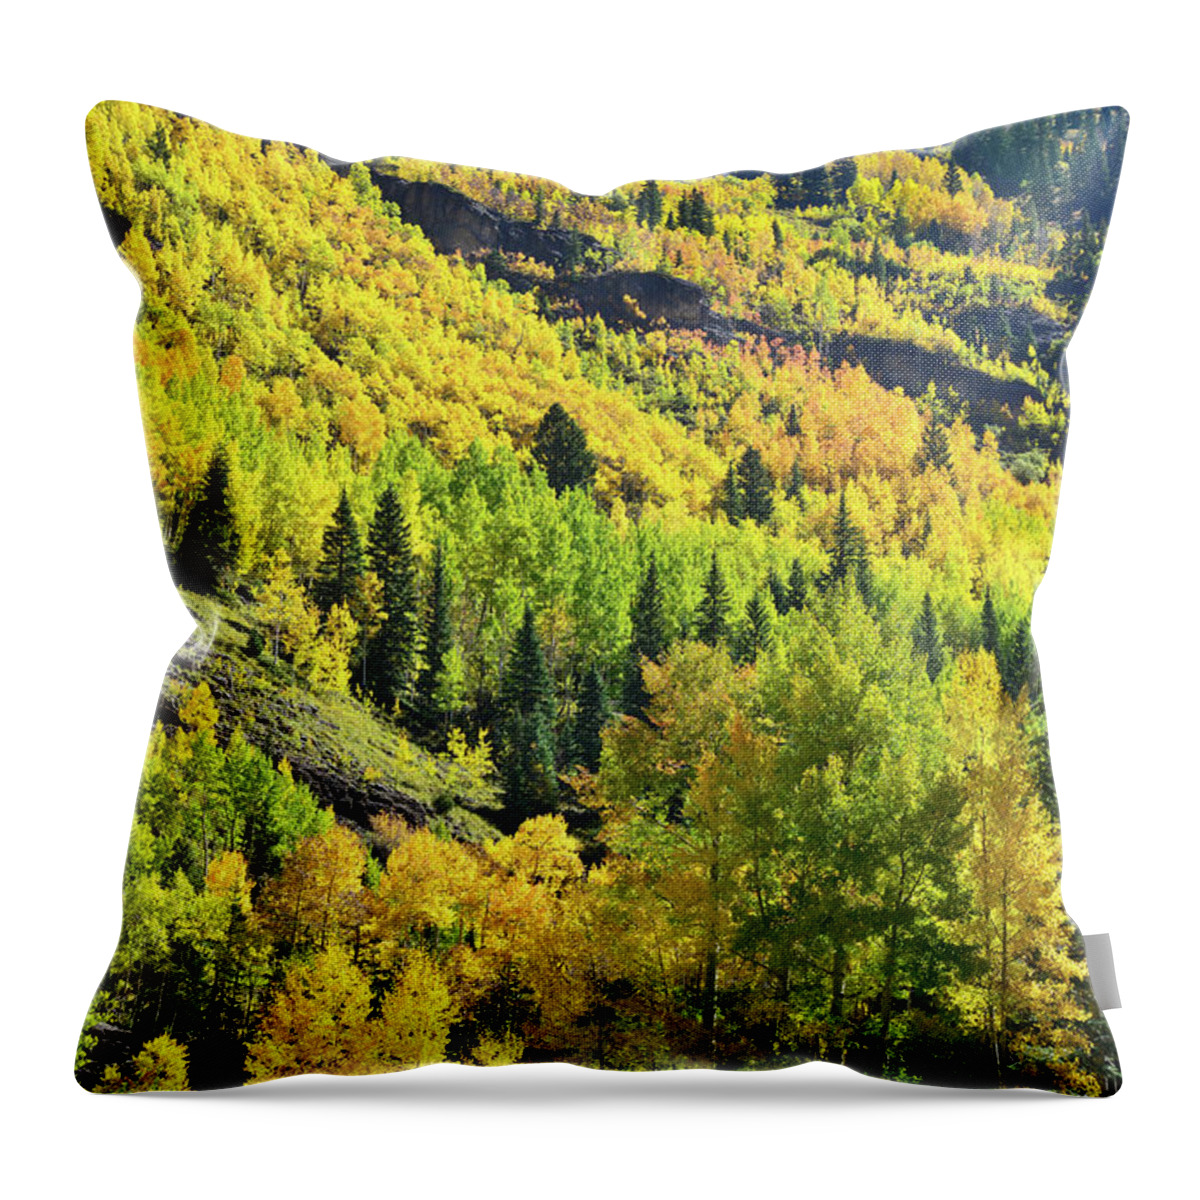 Colorado Throw Pillow featuring the photograph Ouray Canyon Switchbacks by Ray Mathis